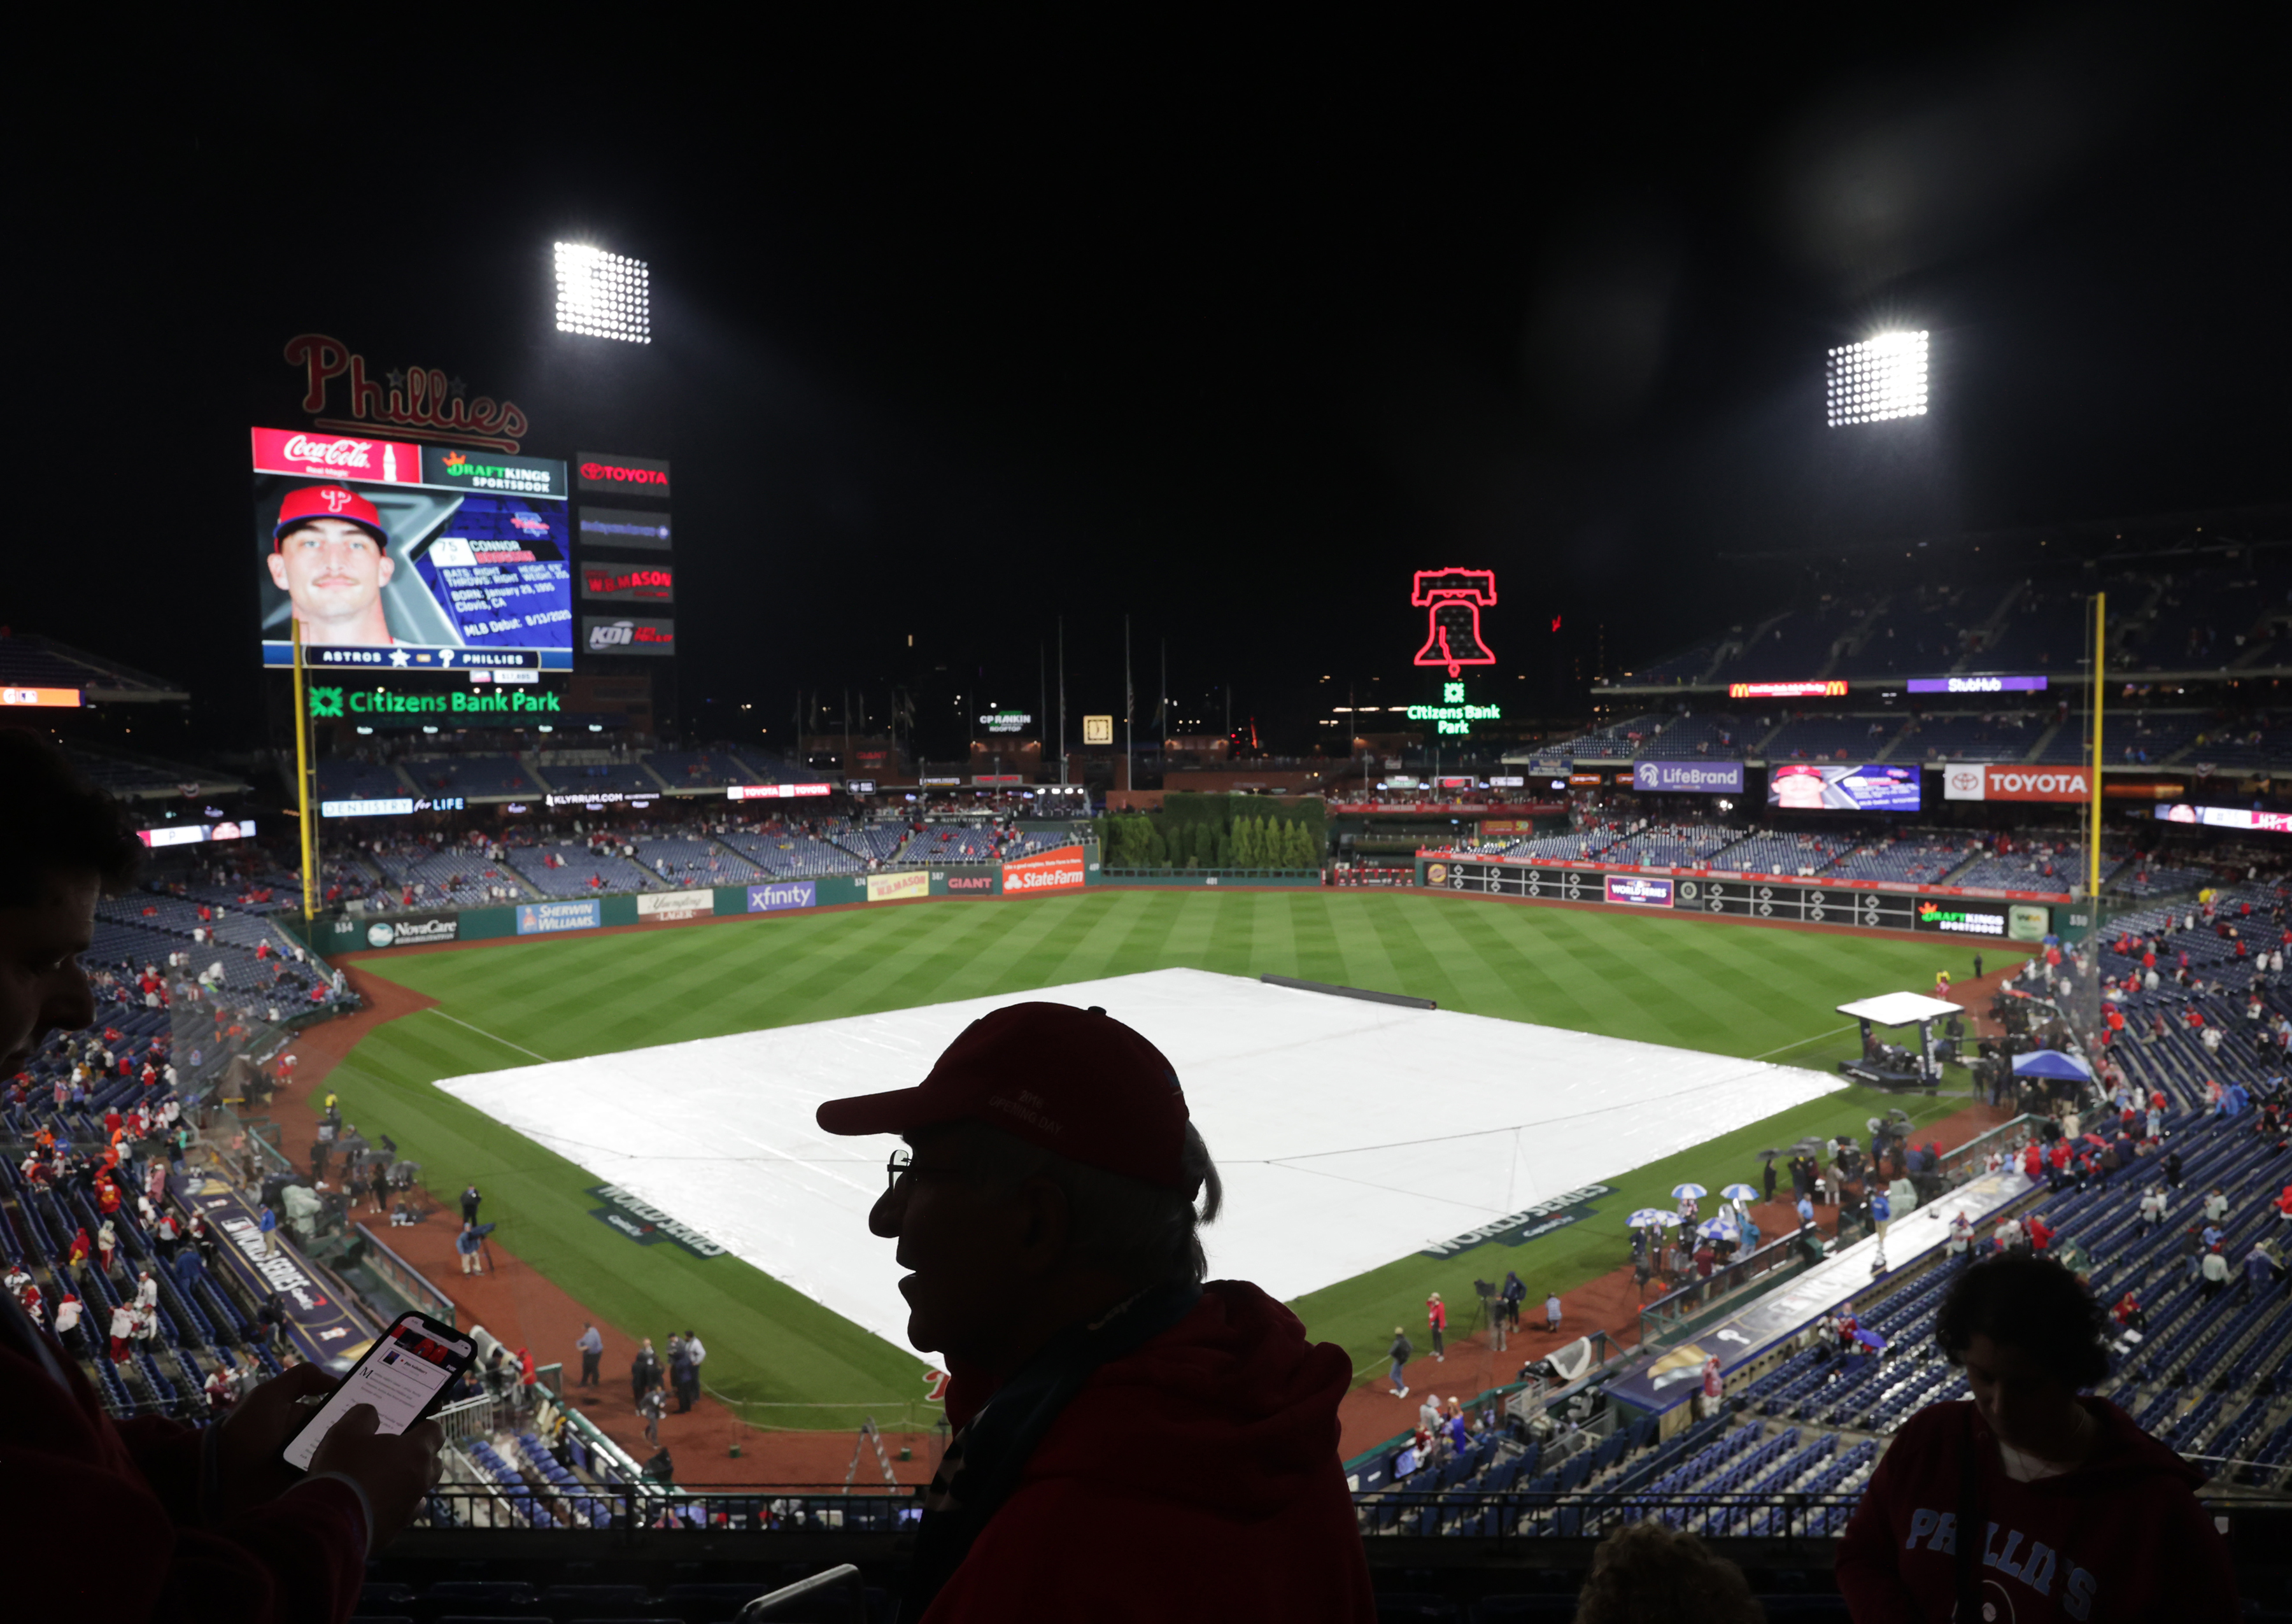 World Series rainout could be a blessing for Phillies pitchers